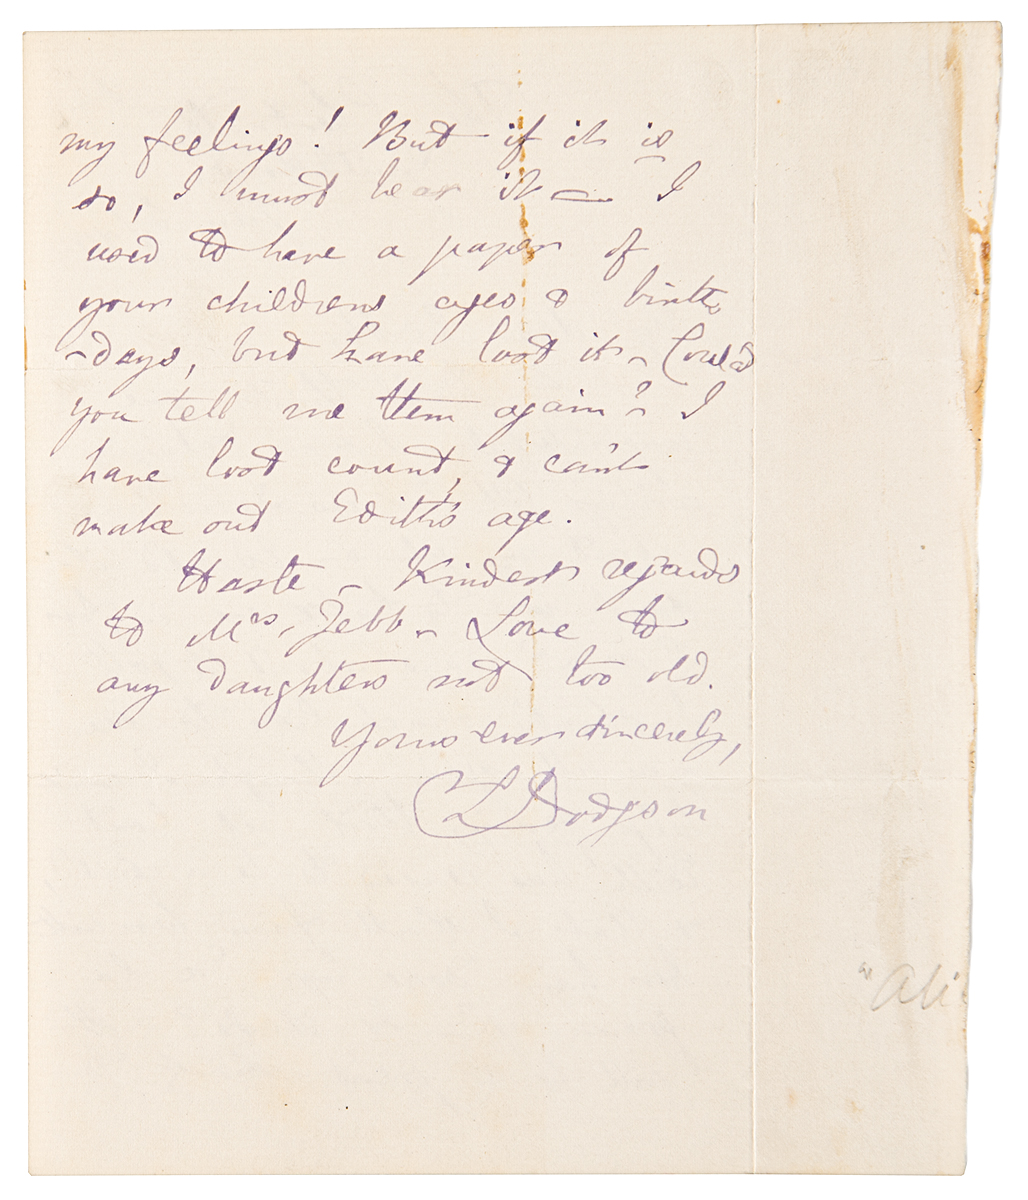 Lot #519 Charles L. Dodgson Autograph Letter Signed: "Love to any daughters not too old" - Image 2